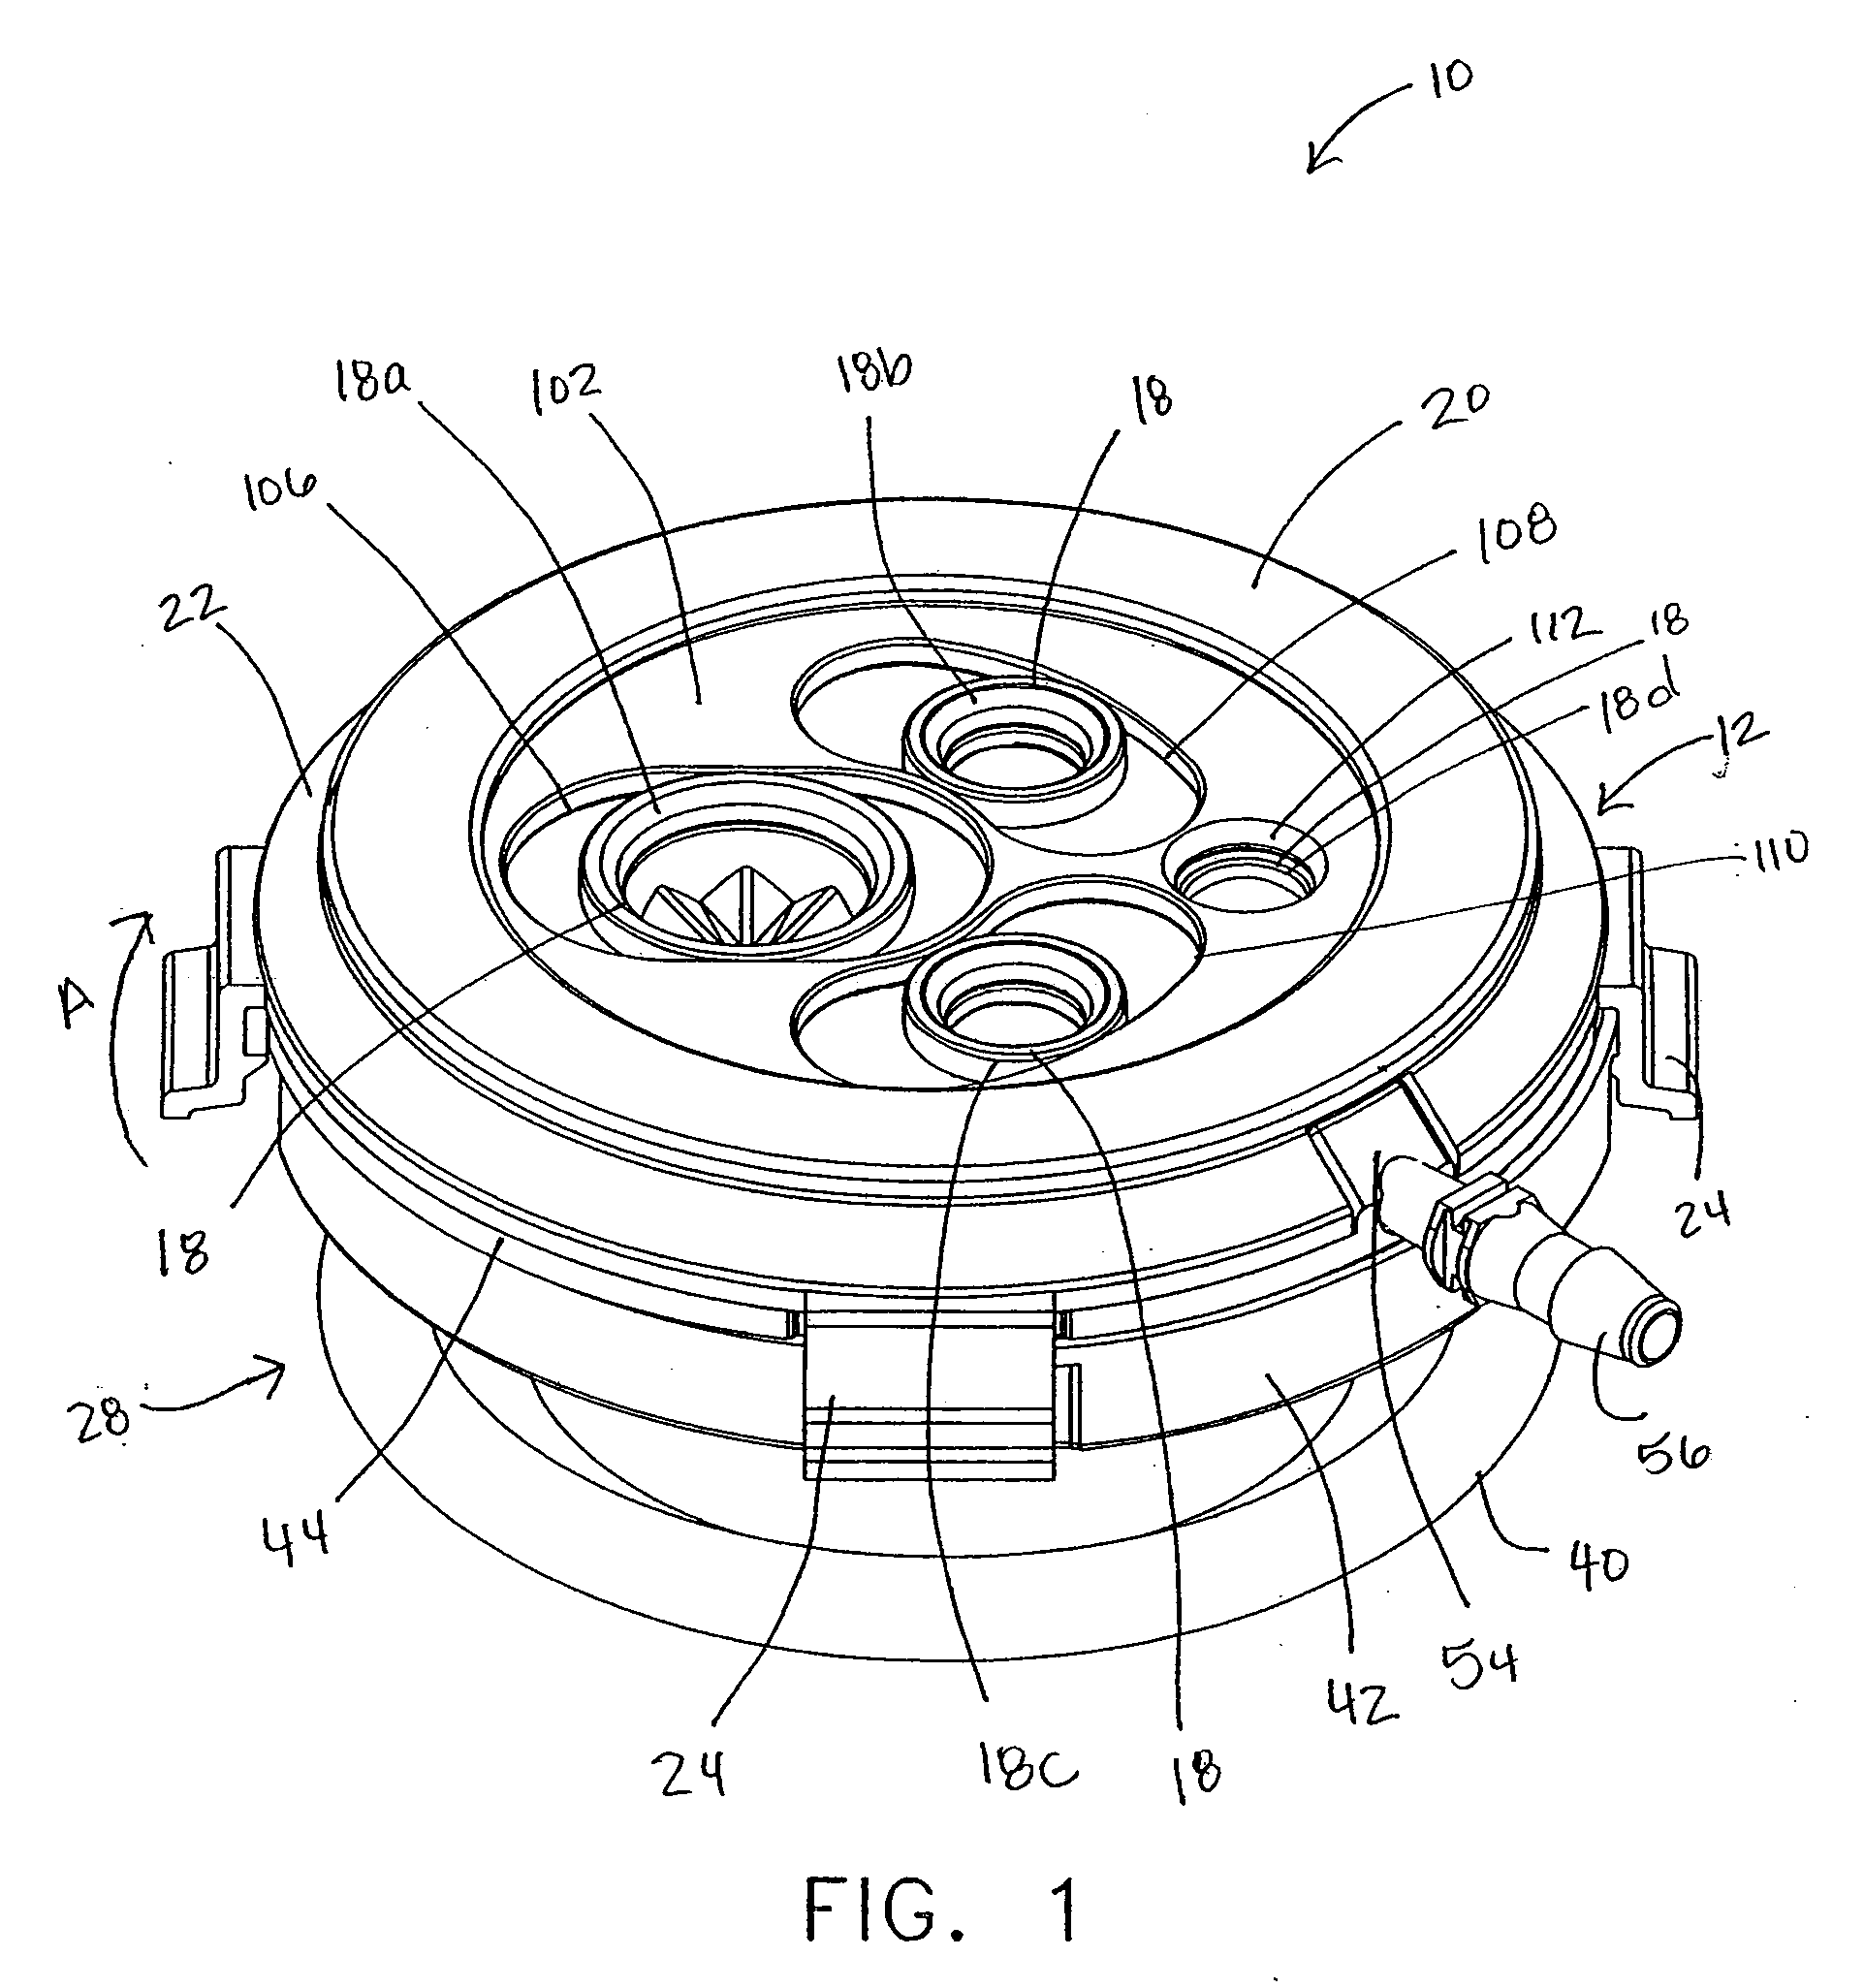 Surgical access devices and methods providing seal movement in predefined movement regions